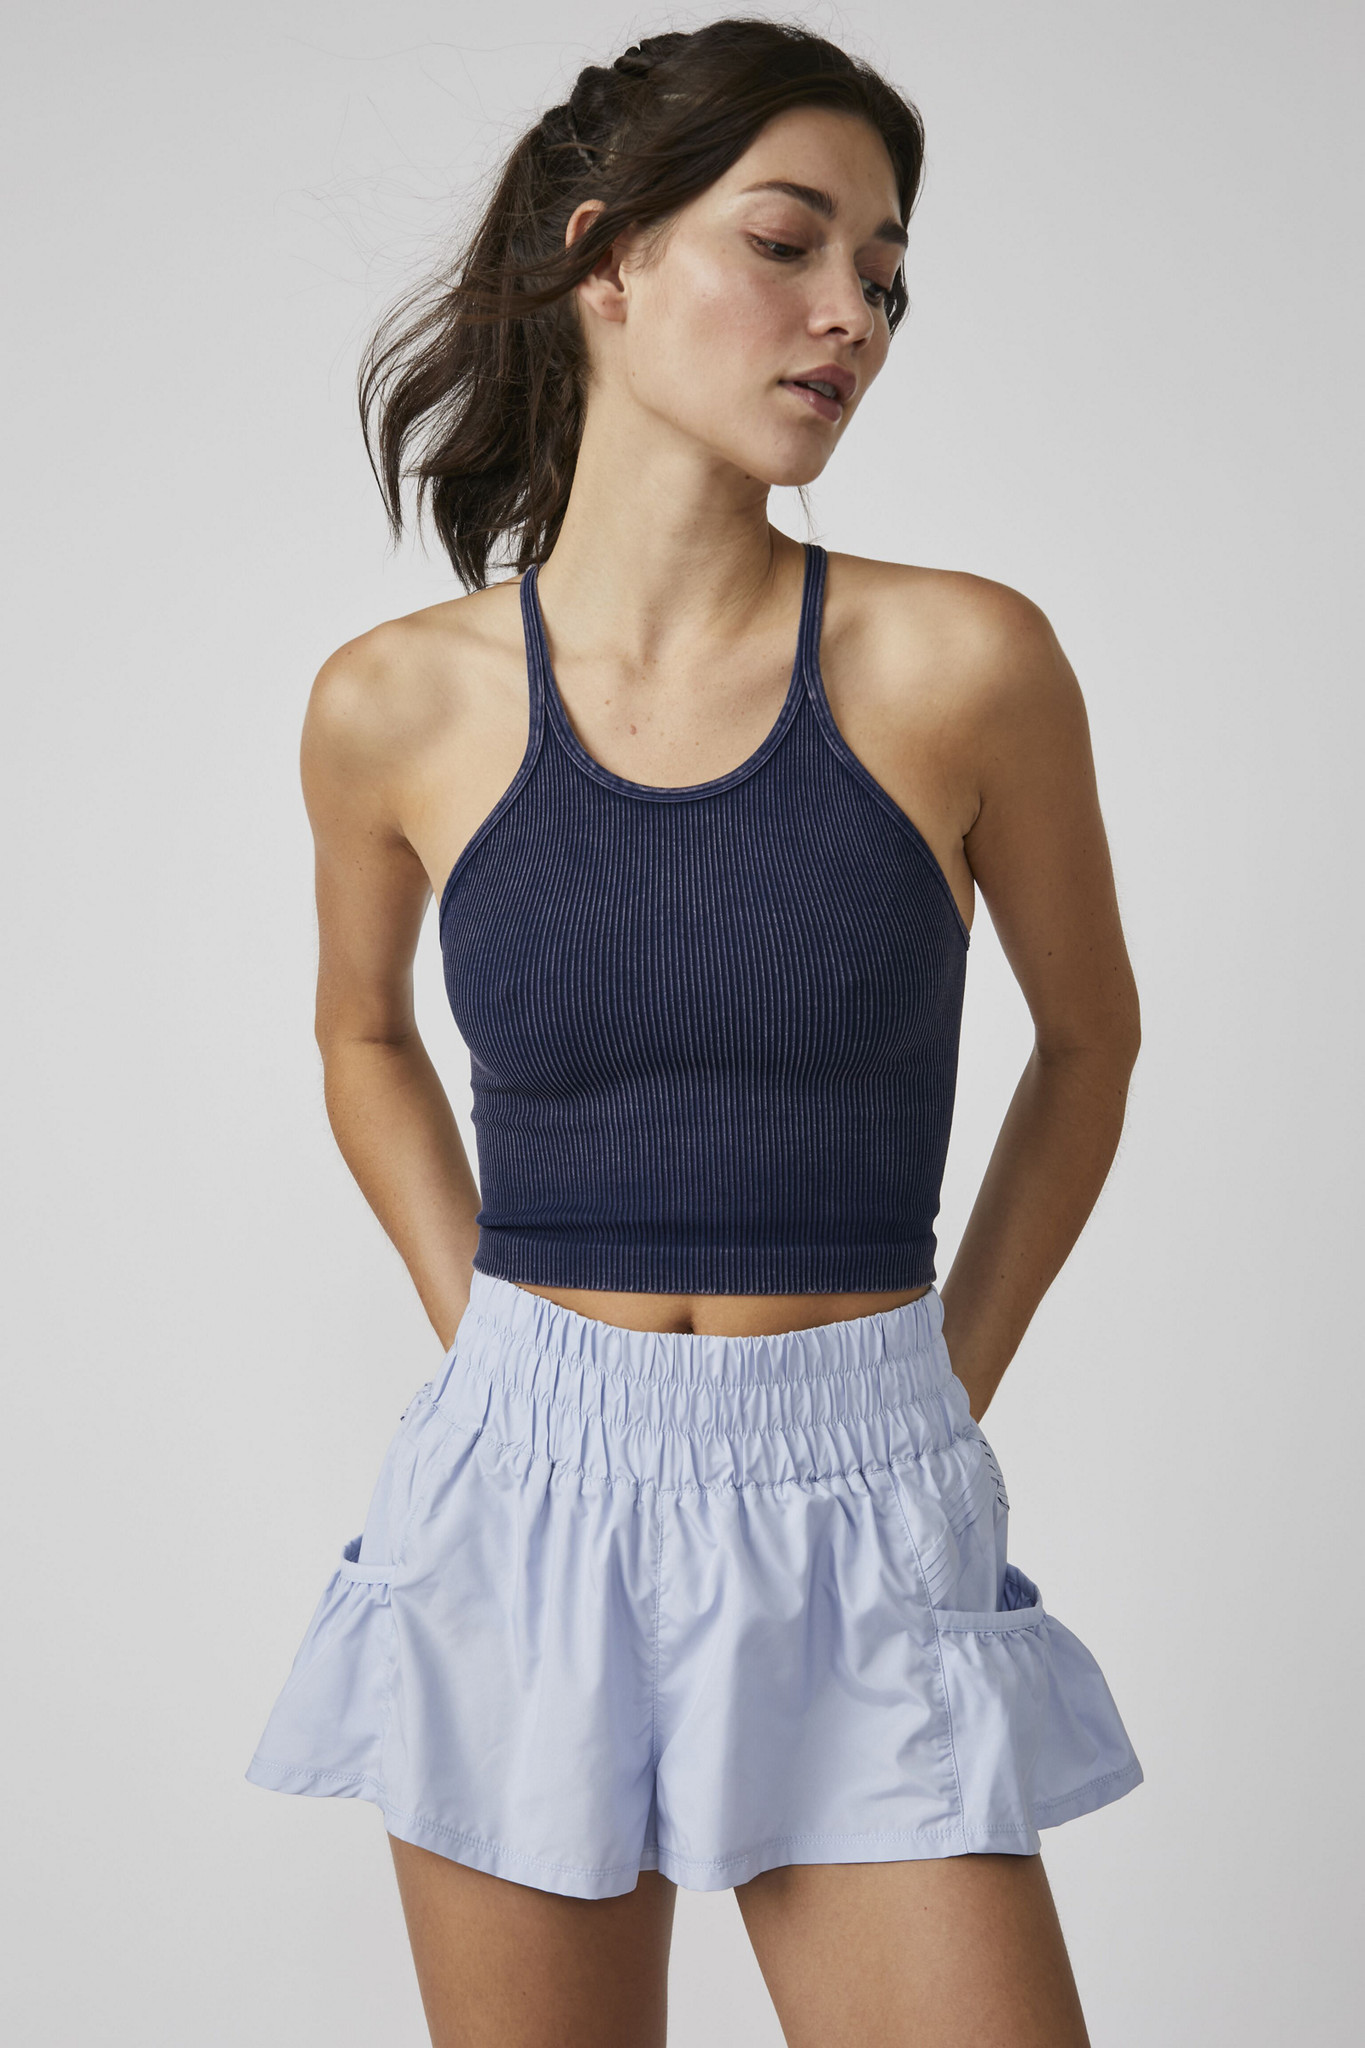 Get Your Flirt On Shorts  Workout attire, Free people activewear, Clothes  for women